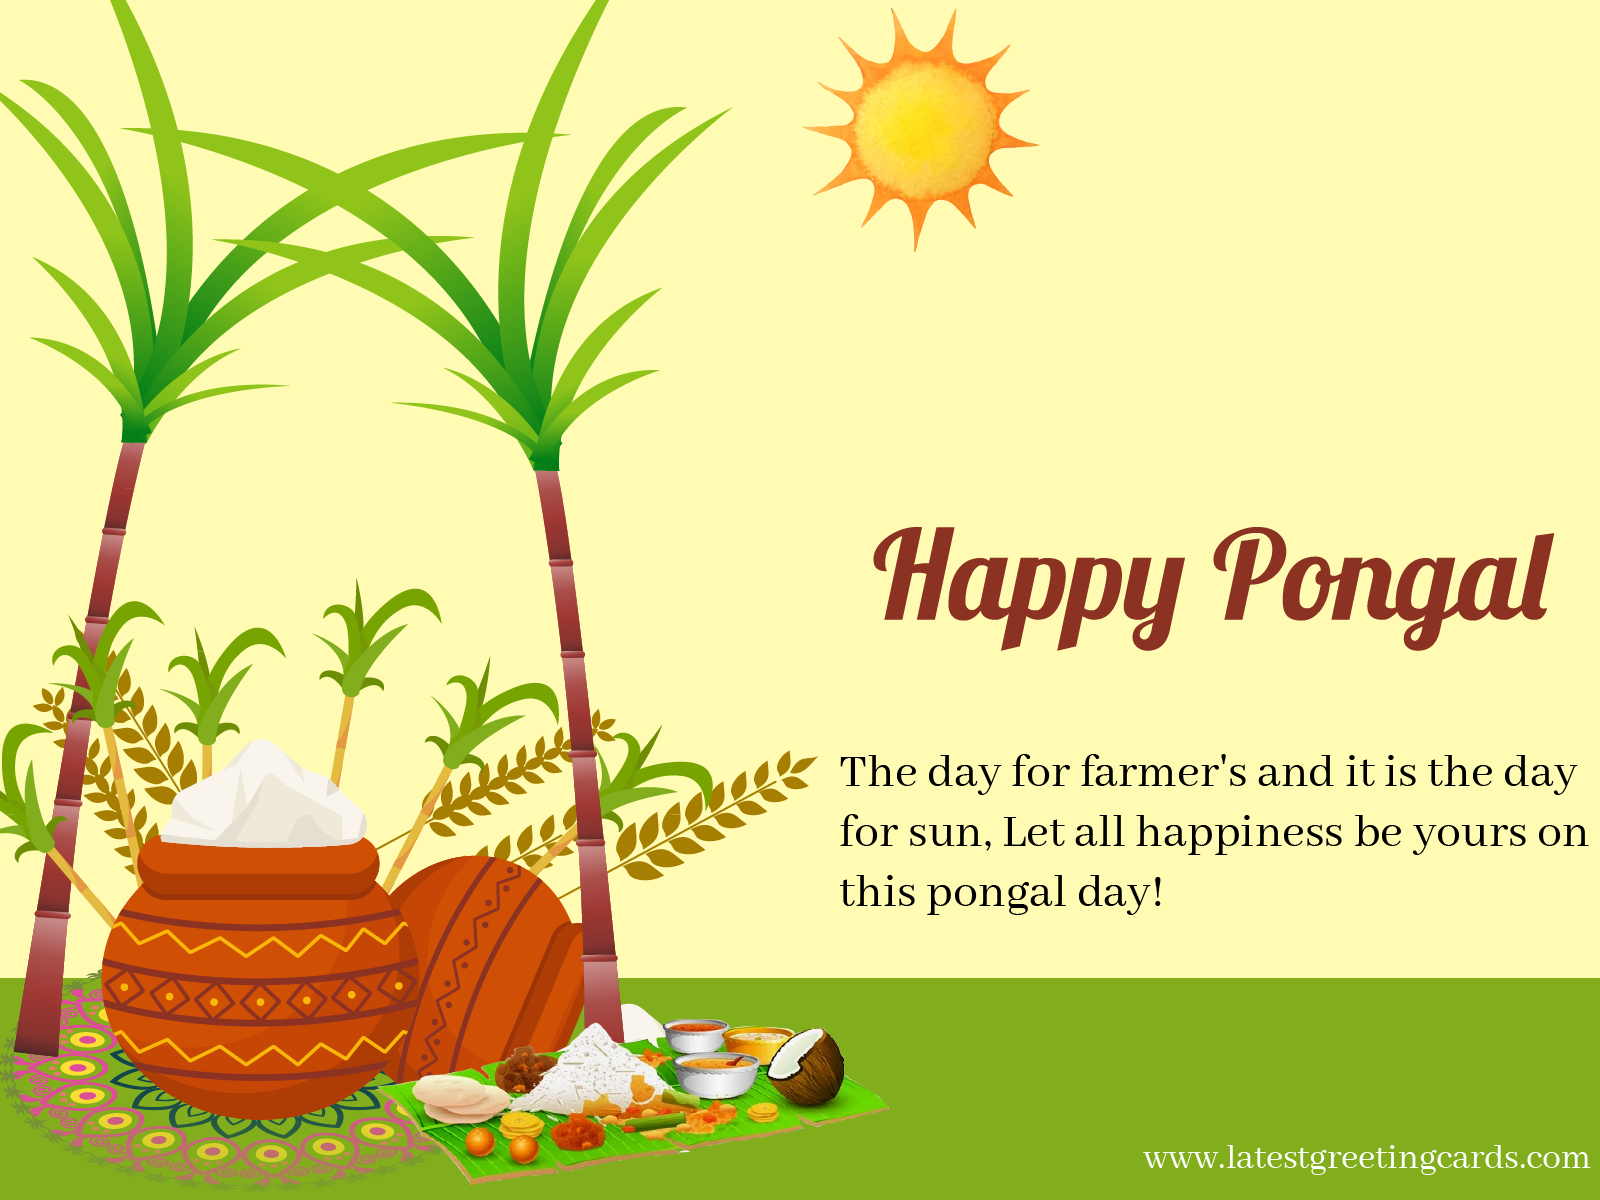 Pongal Wishes In English 2020 - HD Wallpaper 